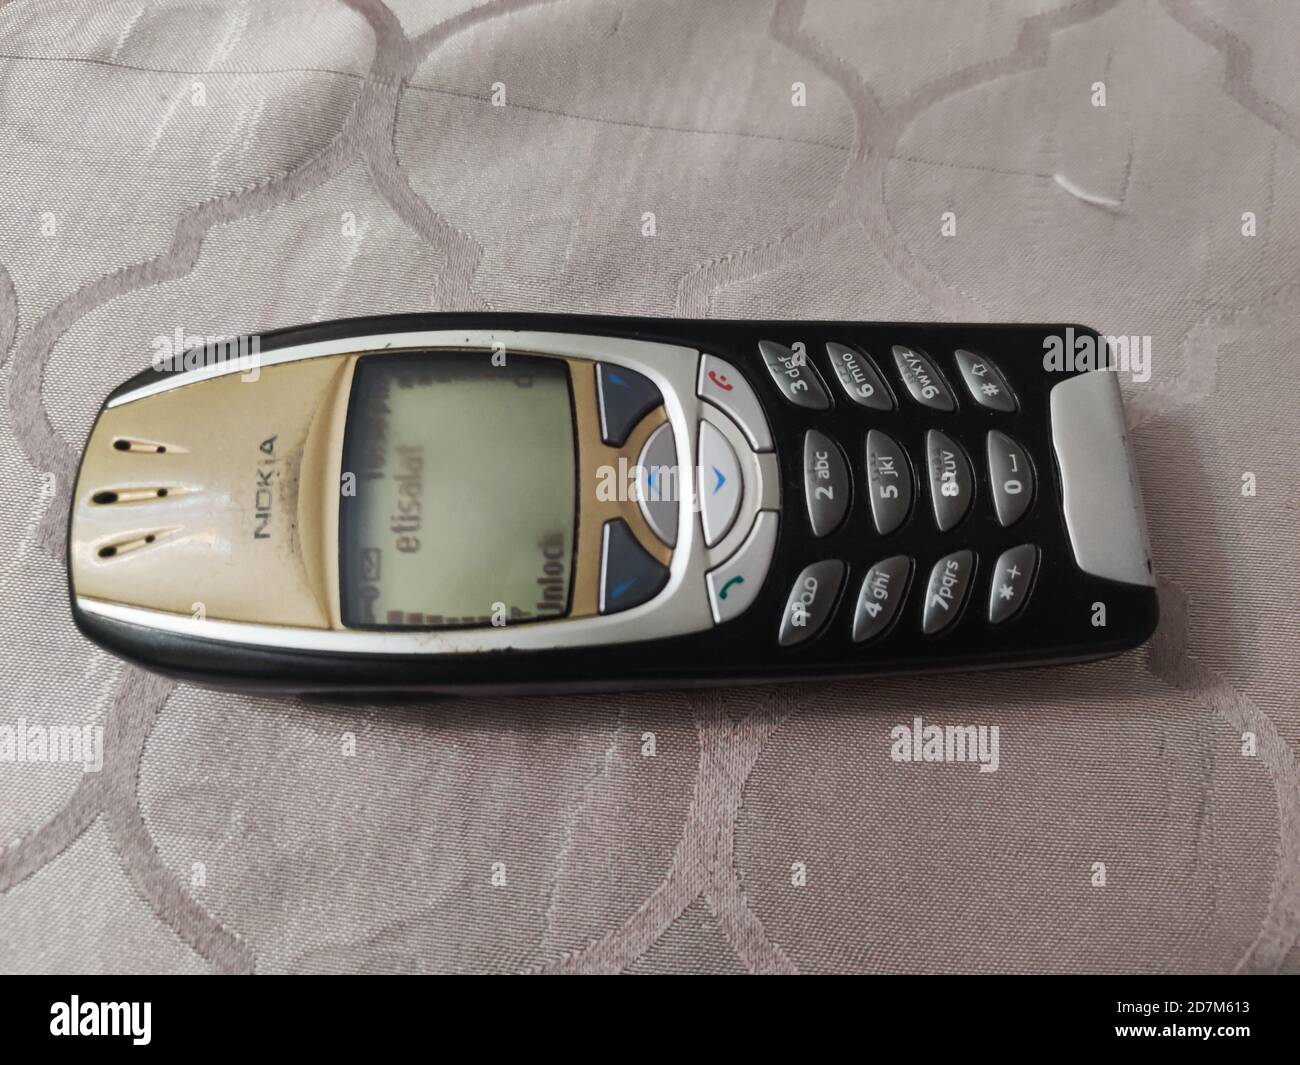 Nokia old Mobile Phone in black and gold colors, Nokia's most popular phone launched in the 2000's Stock Photo